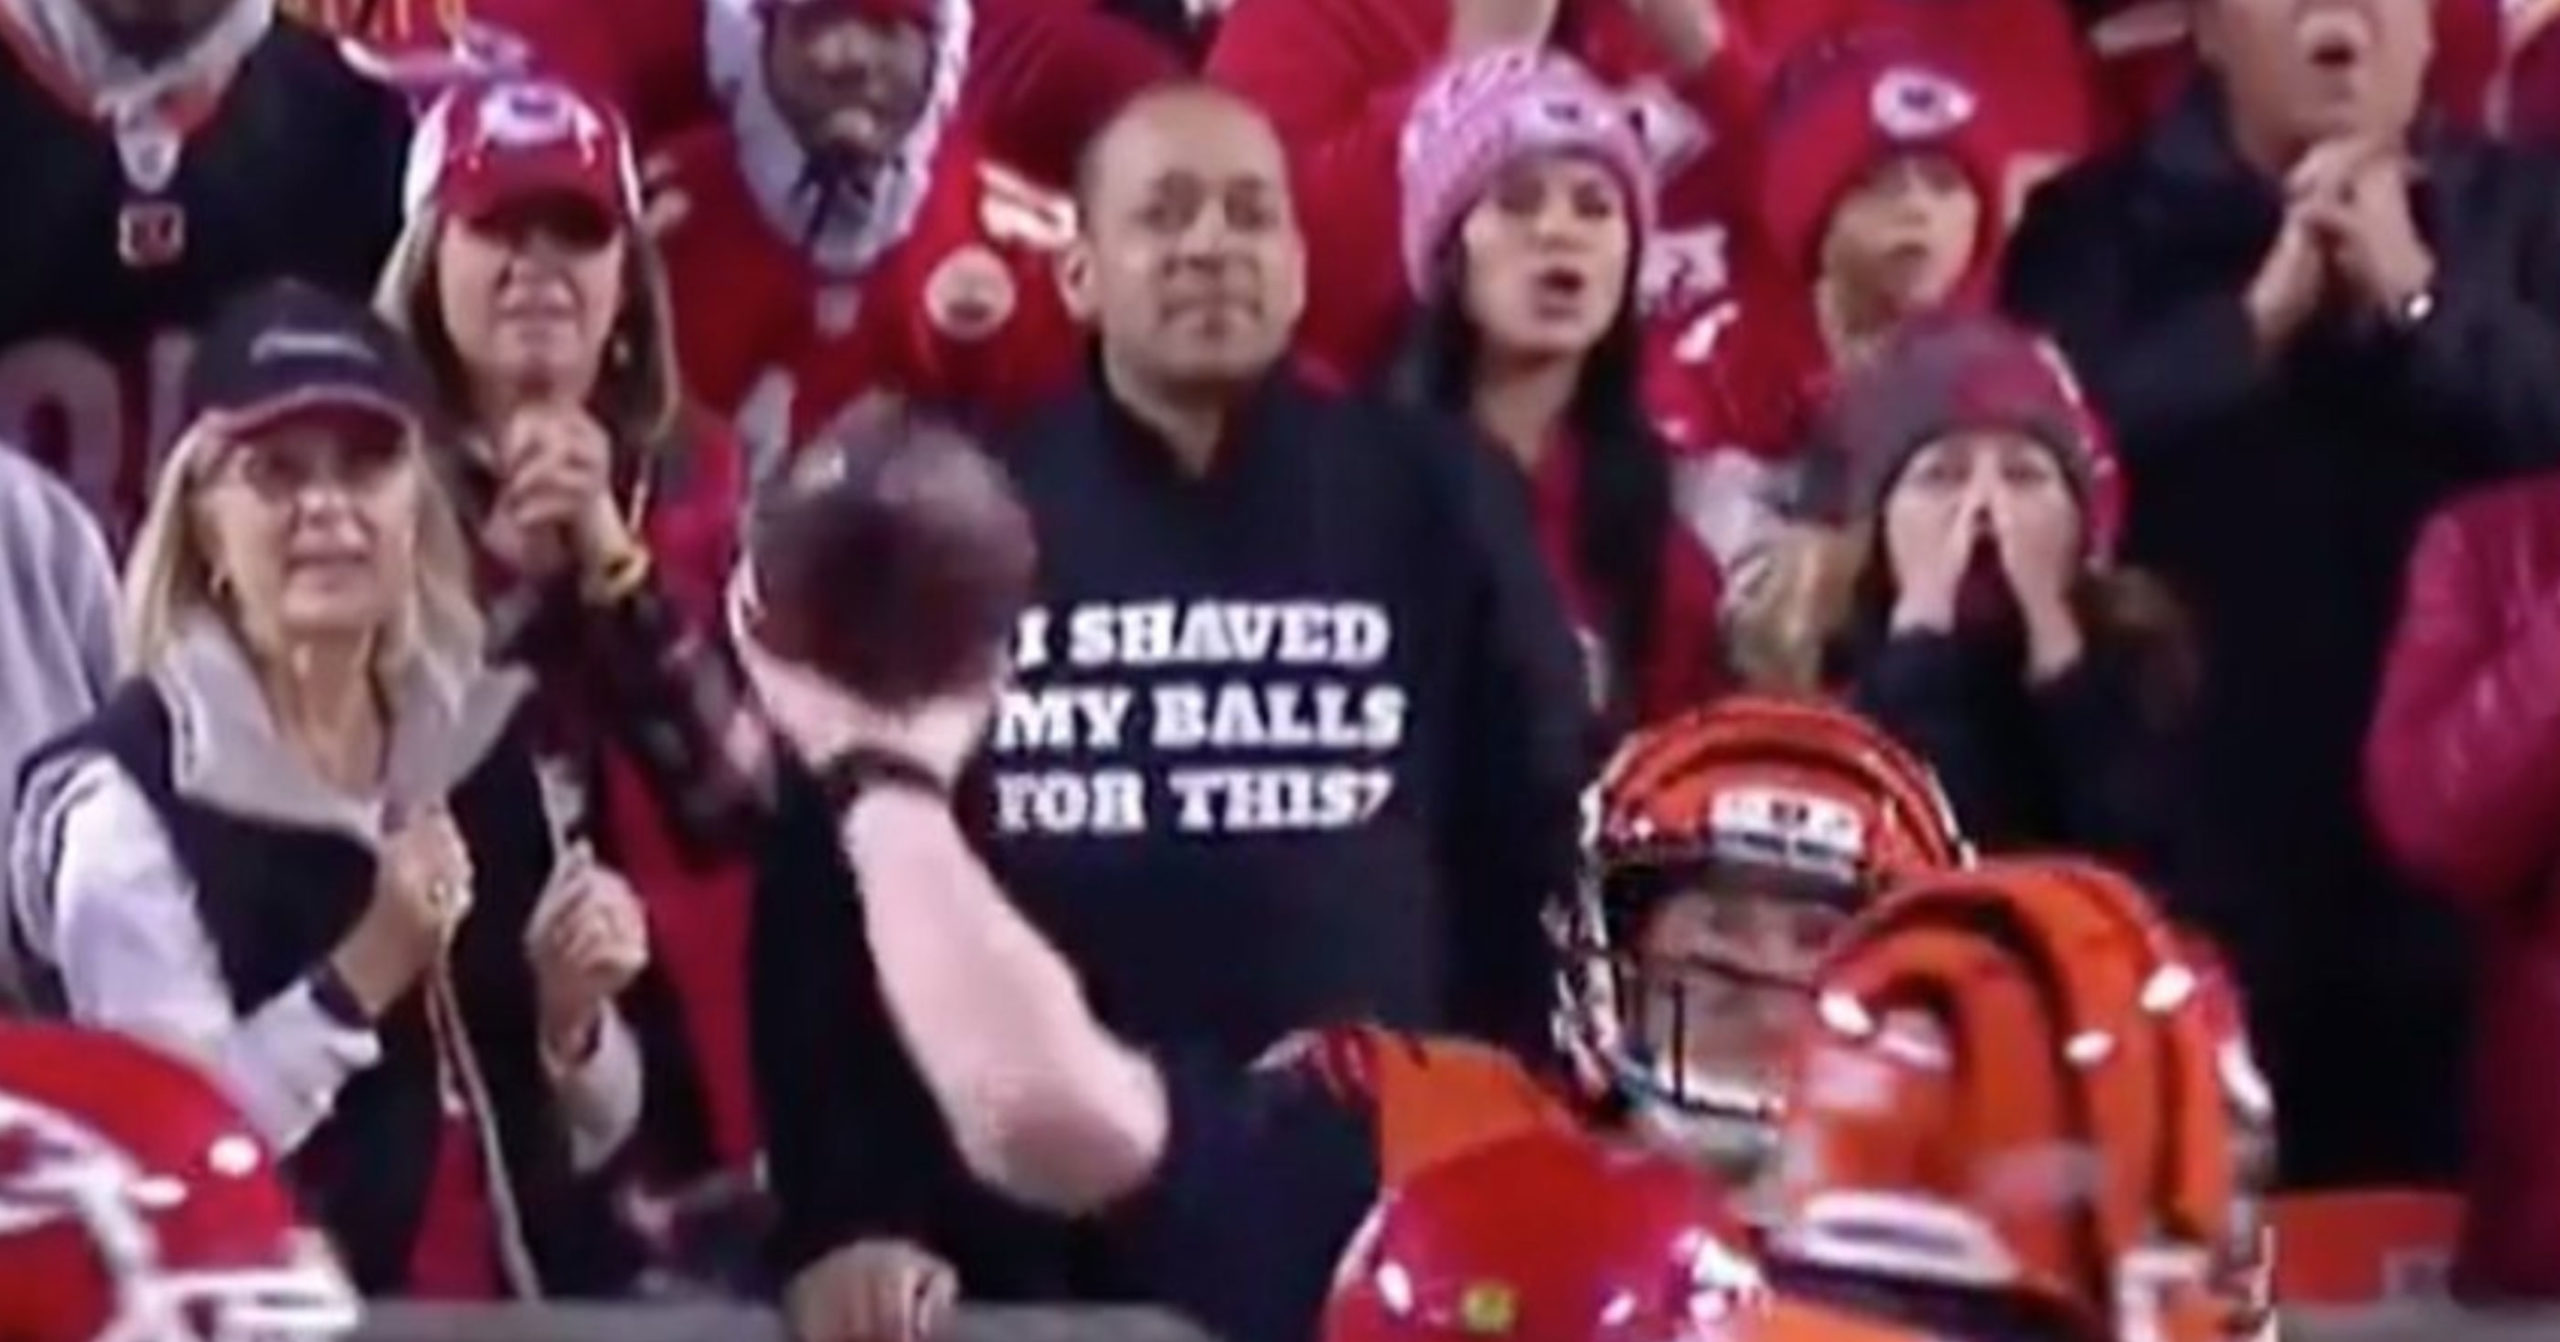 Fan Spotted At Chiefs-Bengals SNF Game Wearing Hoodie Reading I Shaved My Balls For This?